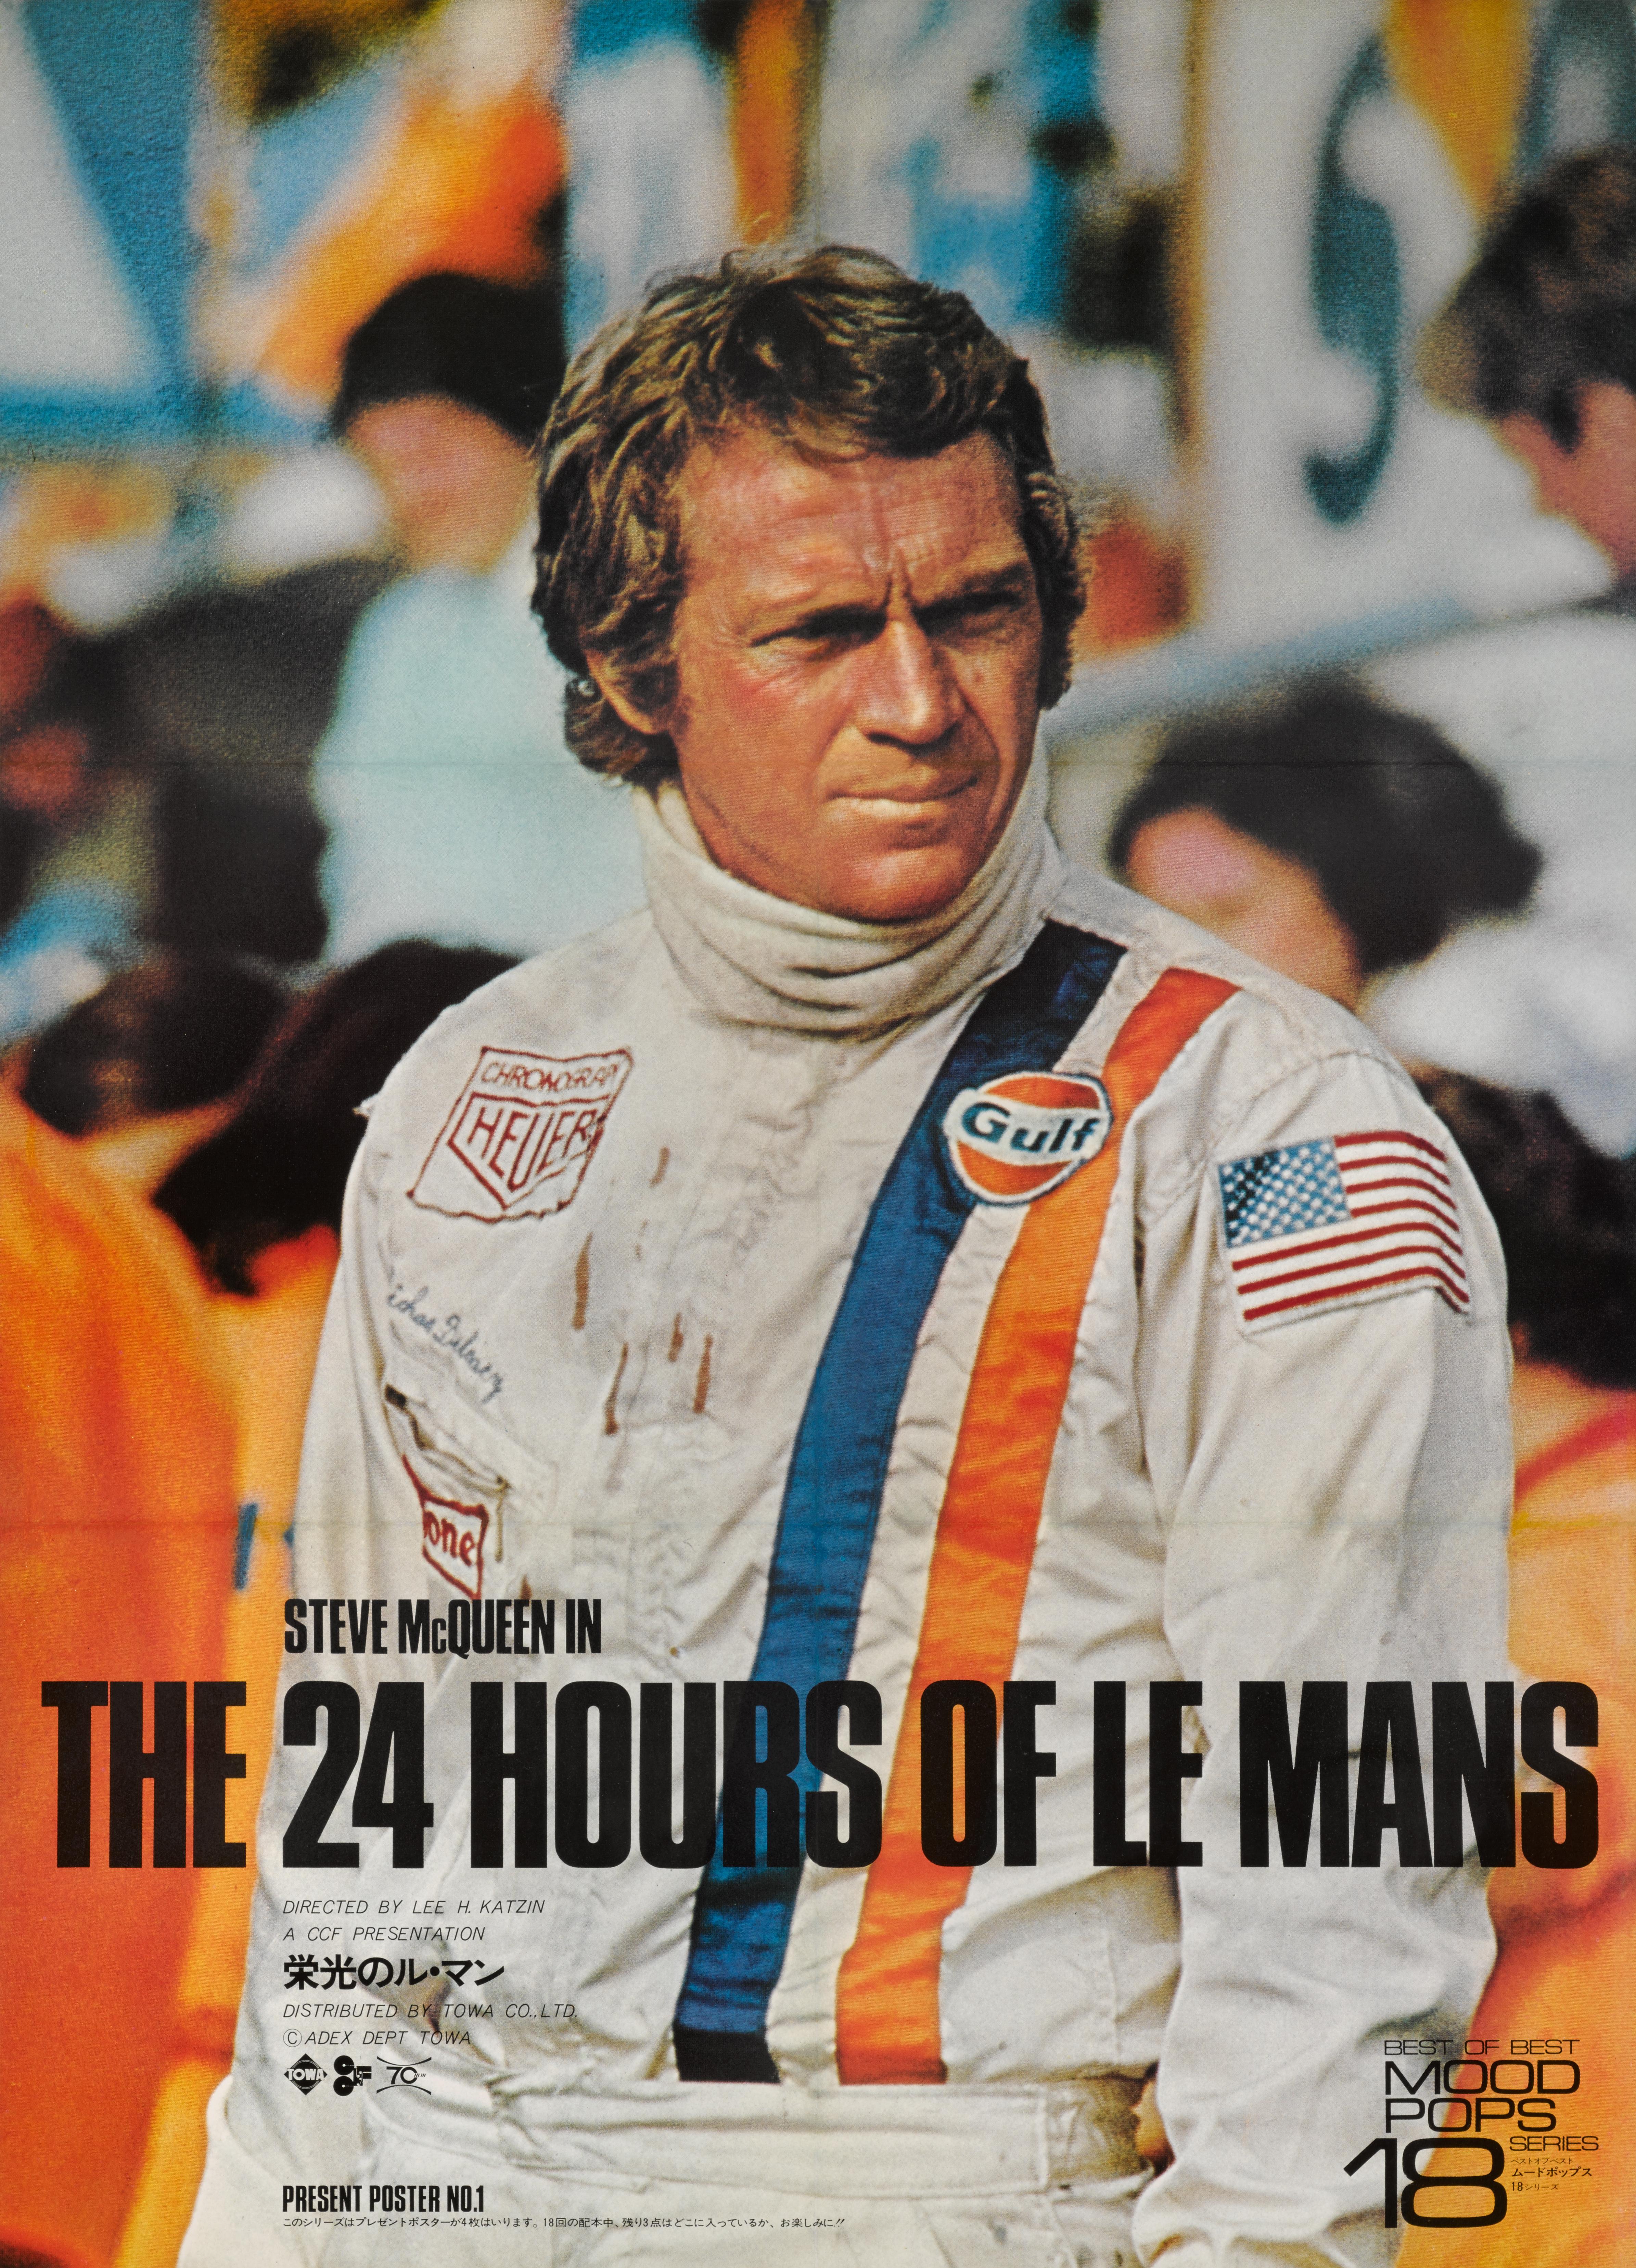 Original Japanese Soundtrack tie-in poster for the Classic 1971 Steve McQueen racing film. This poster is conservation linen backed and would be shipped rolled in a strong tube and shipped by Federal Express.